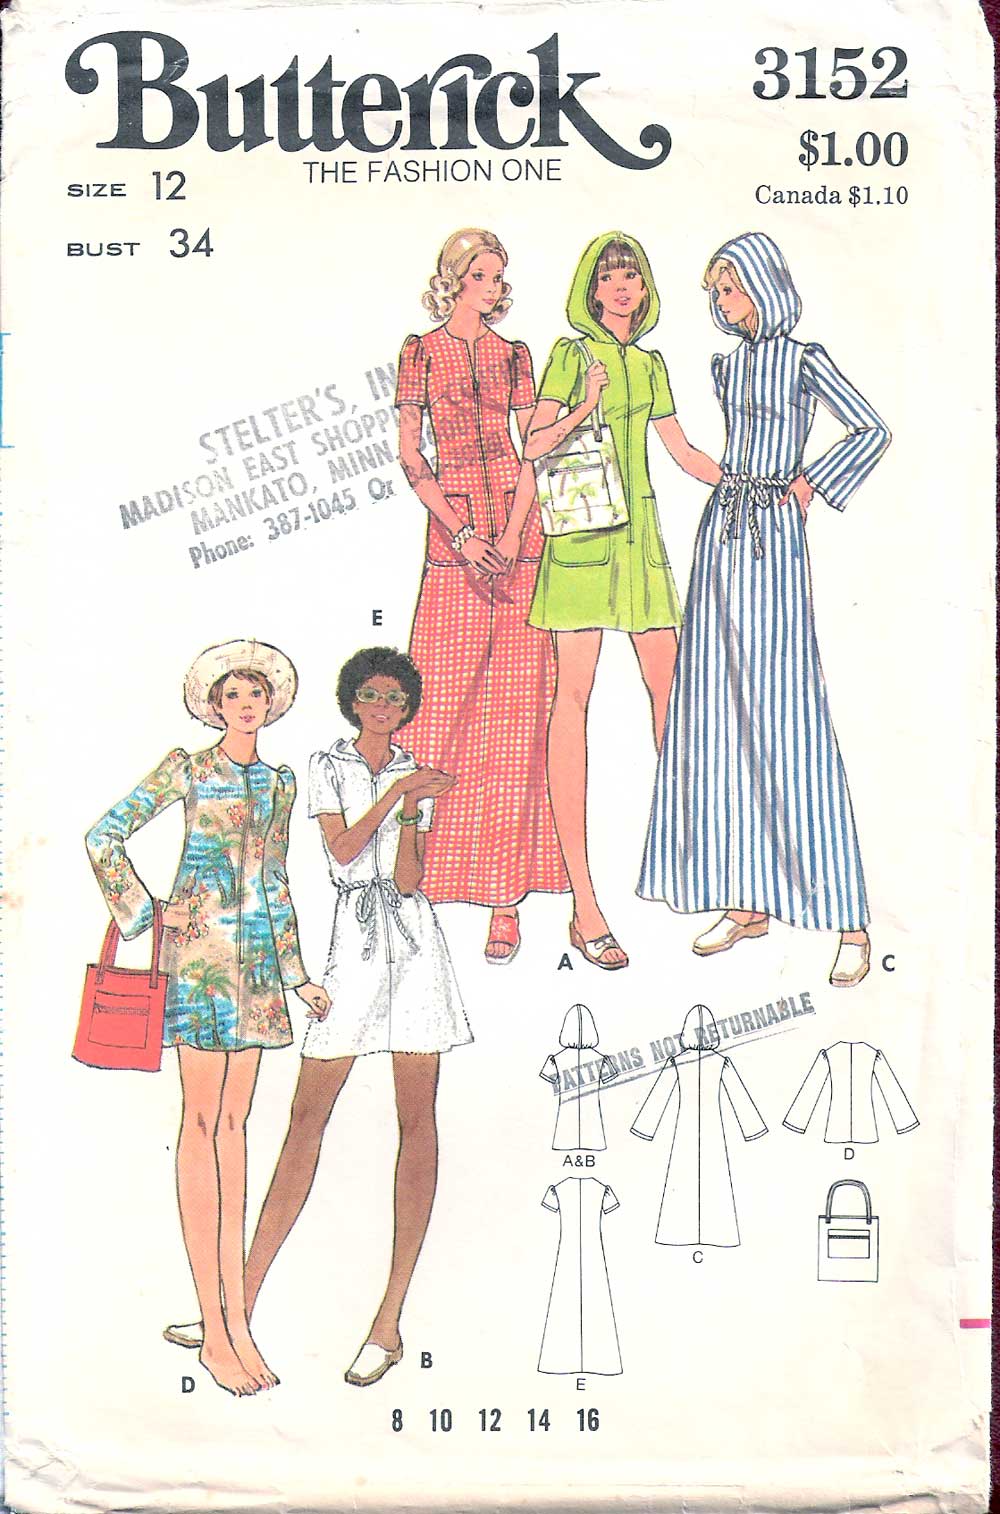 Butterick 3152 A | Vintage Sewing Patterns | FANDOM powered by Wikia